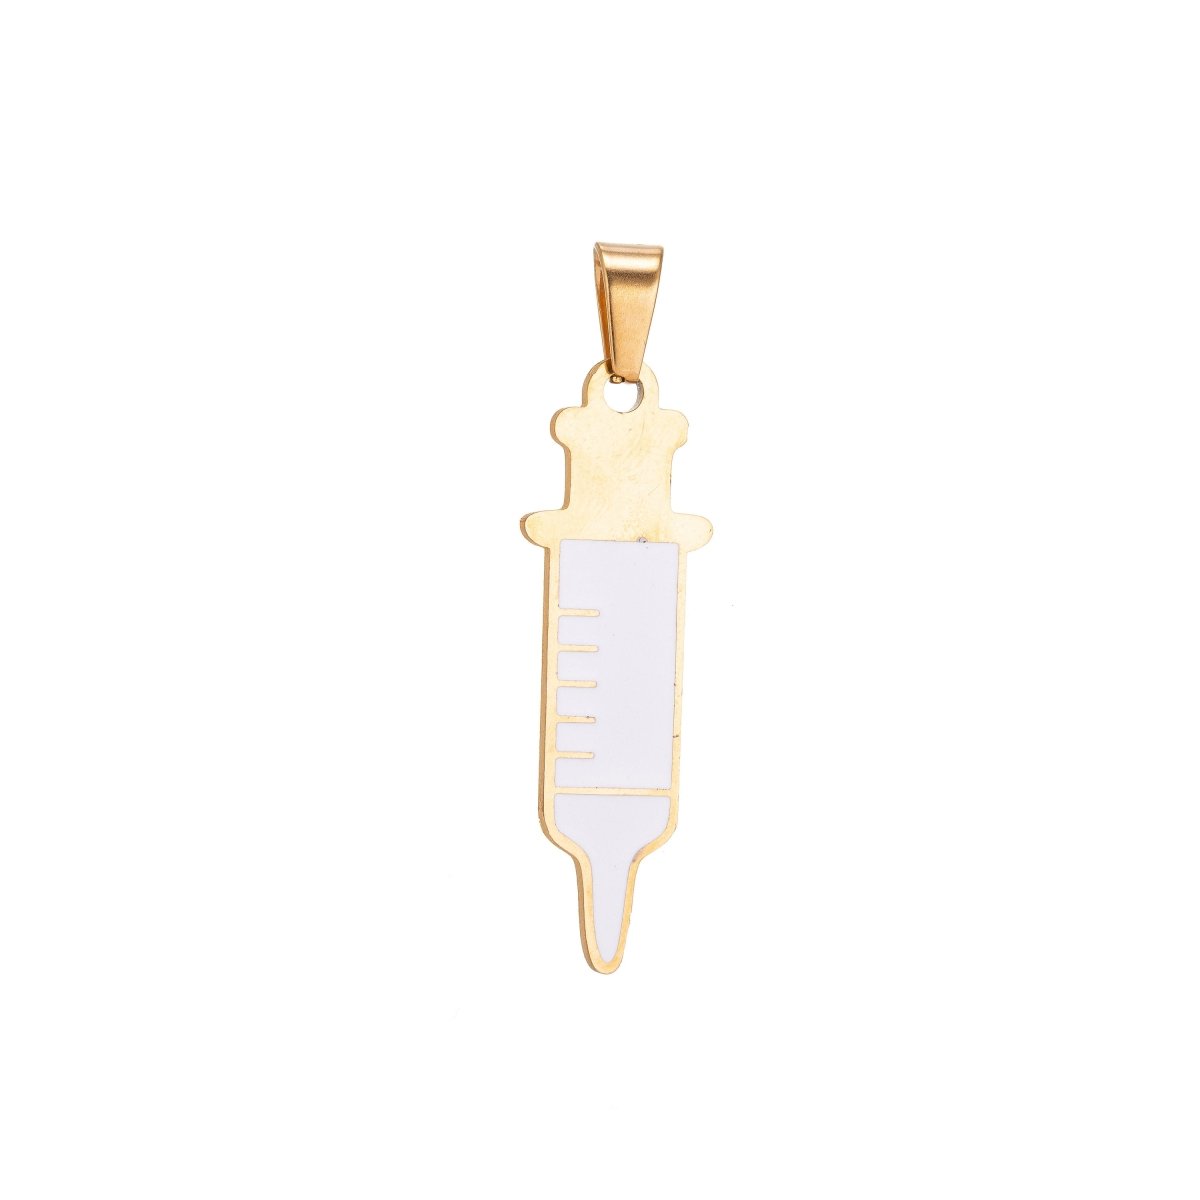 Gold Filled Shot SYRINGE Charms Nurse RN Doctor Medical Themed Pendant Gift idea for Jewelry Making J-412 - DLUXCA